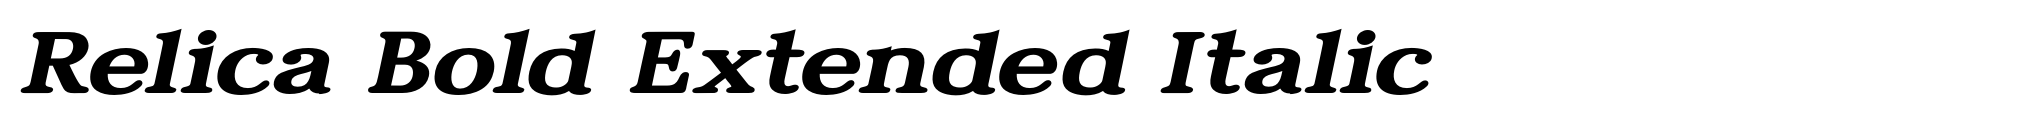 Relica Bold Extended Italic image